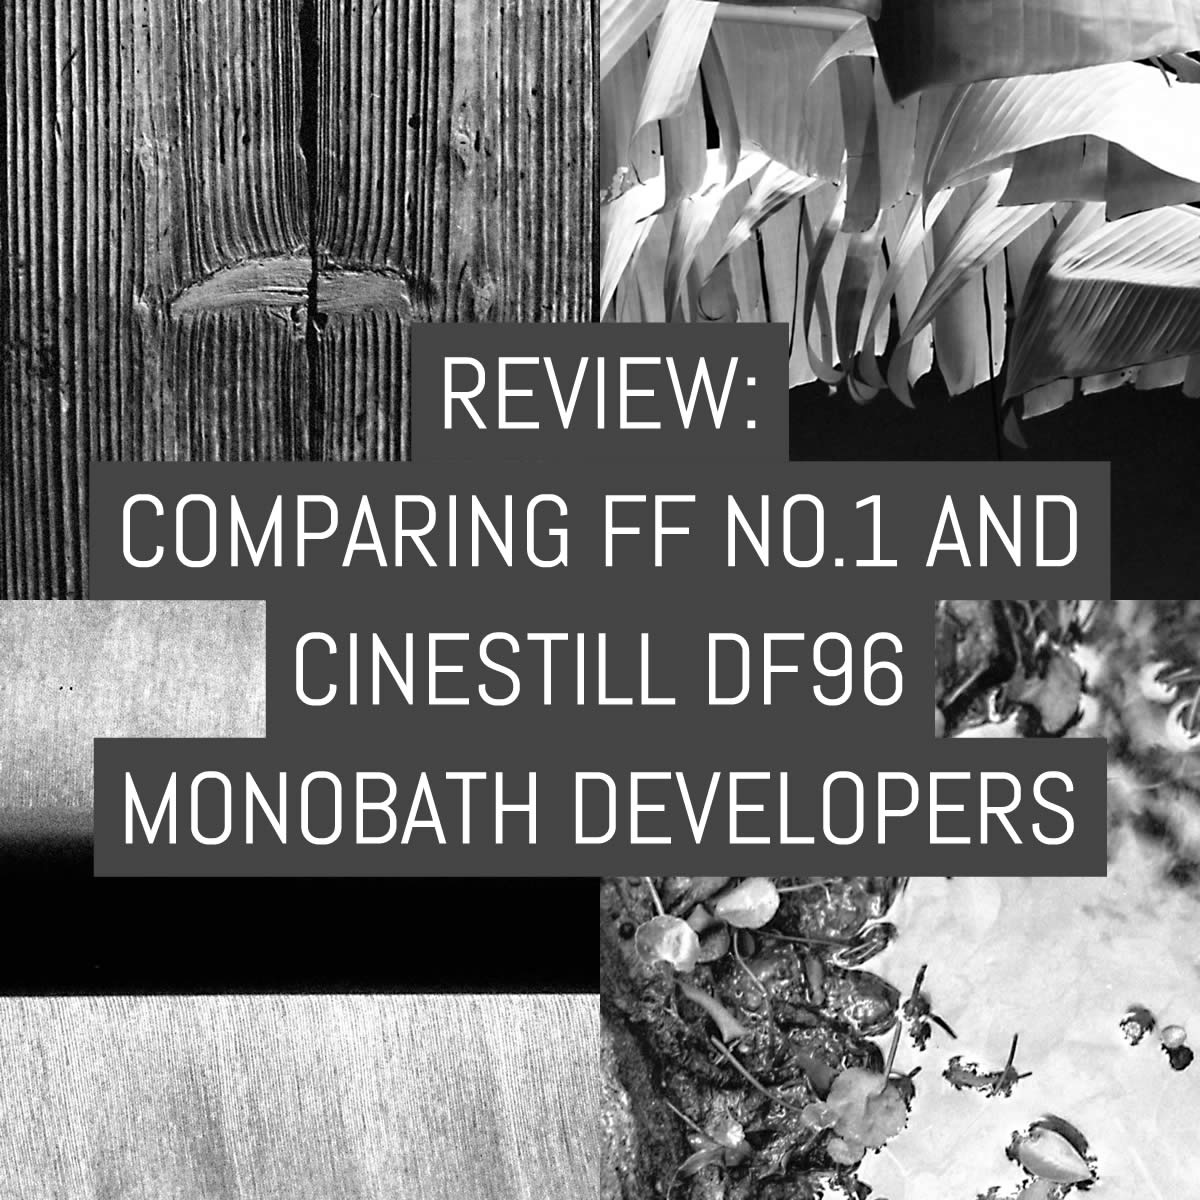 Review: Comparing FF No.1 and Cinestill Df96 monobath developers